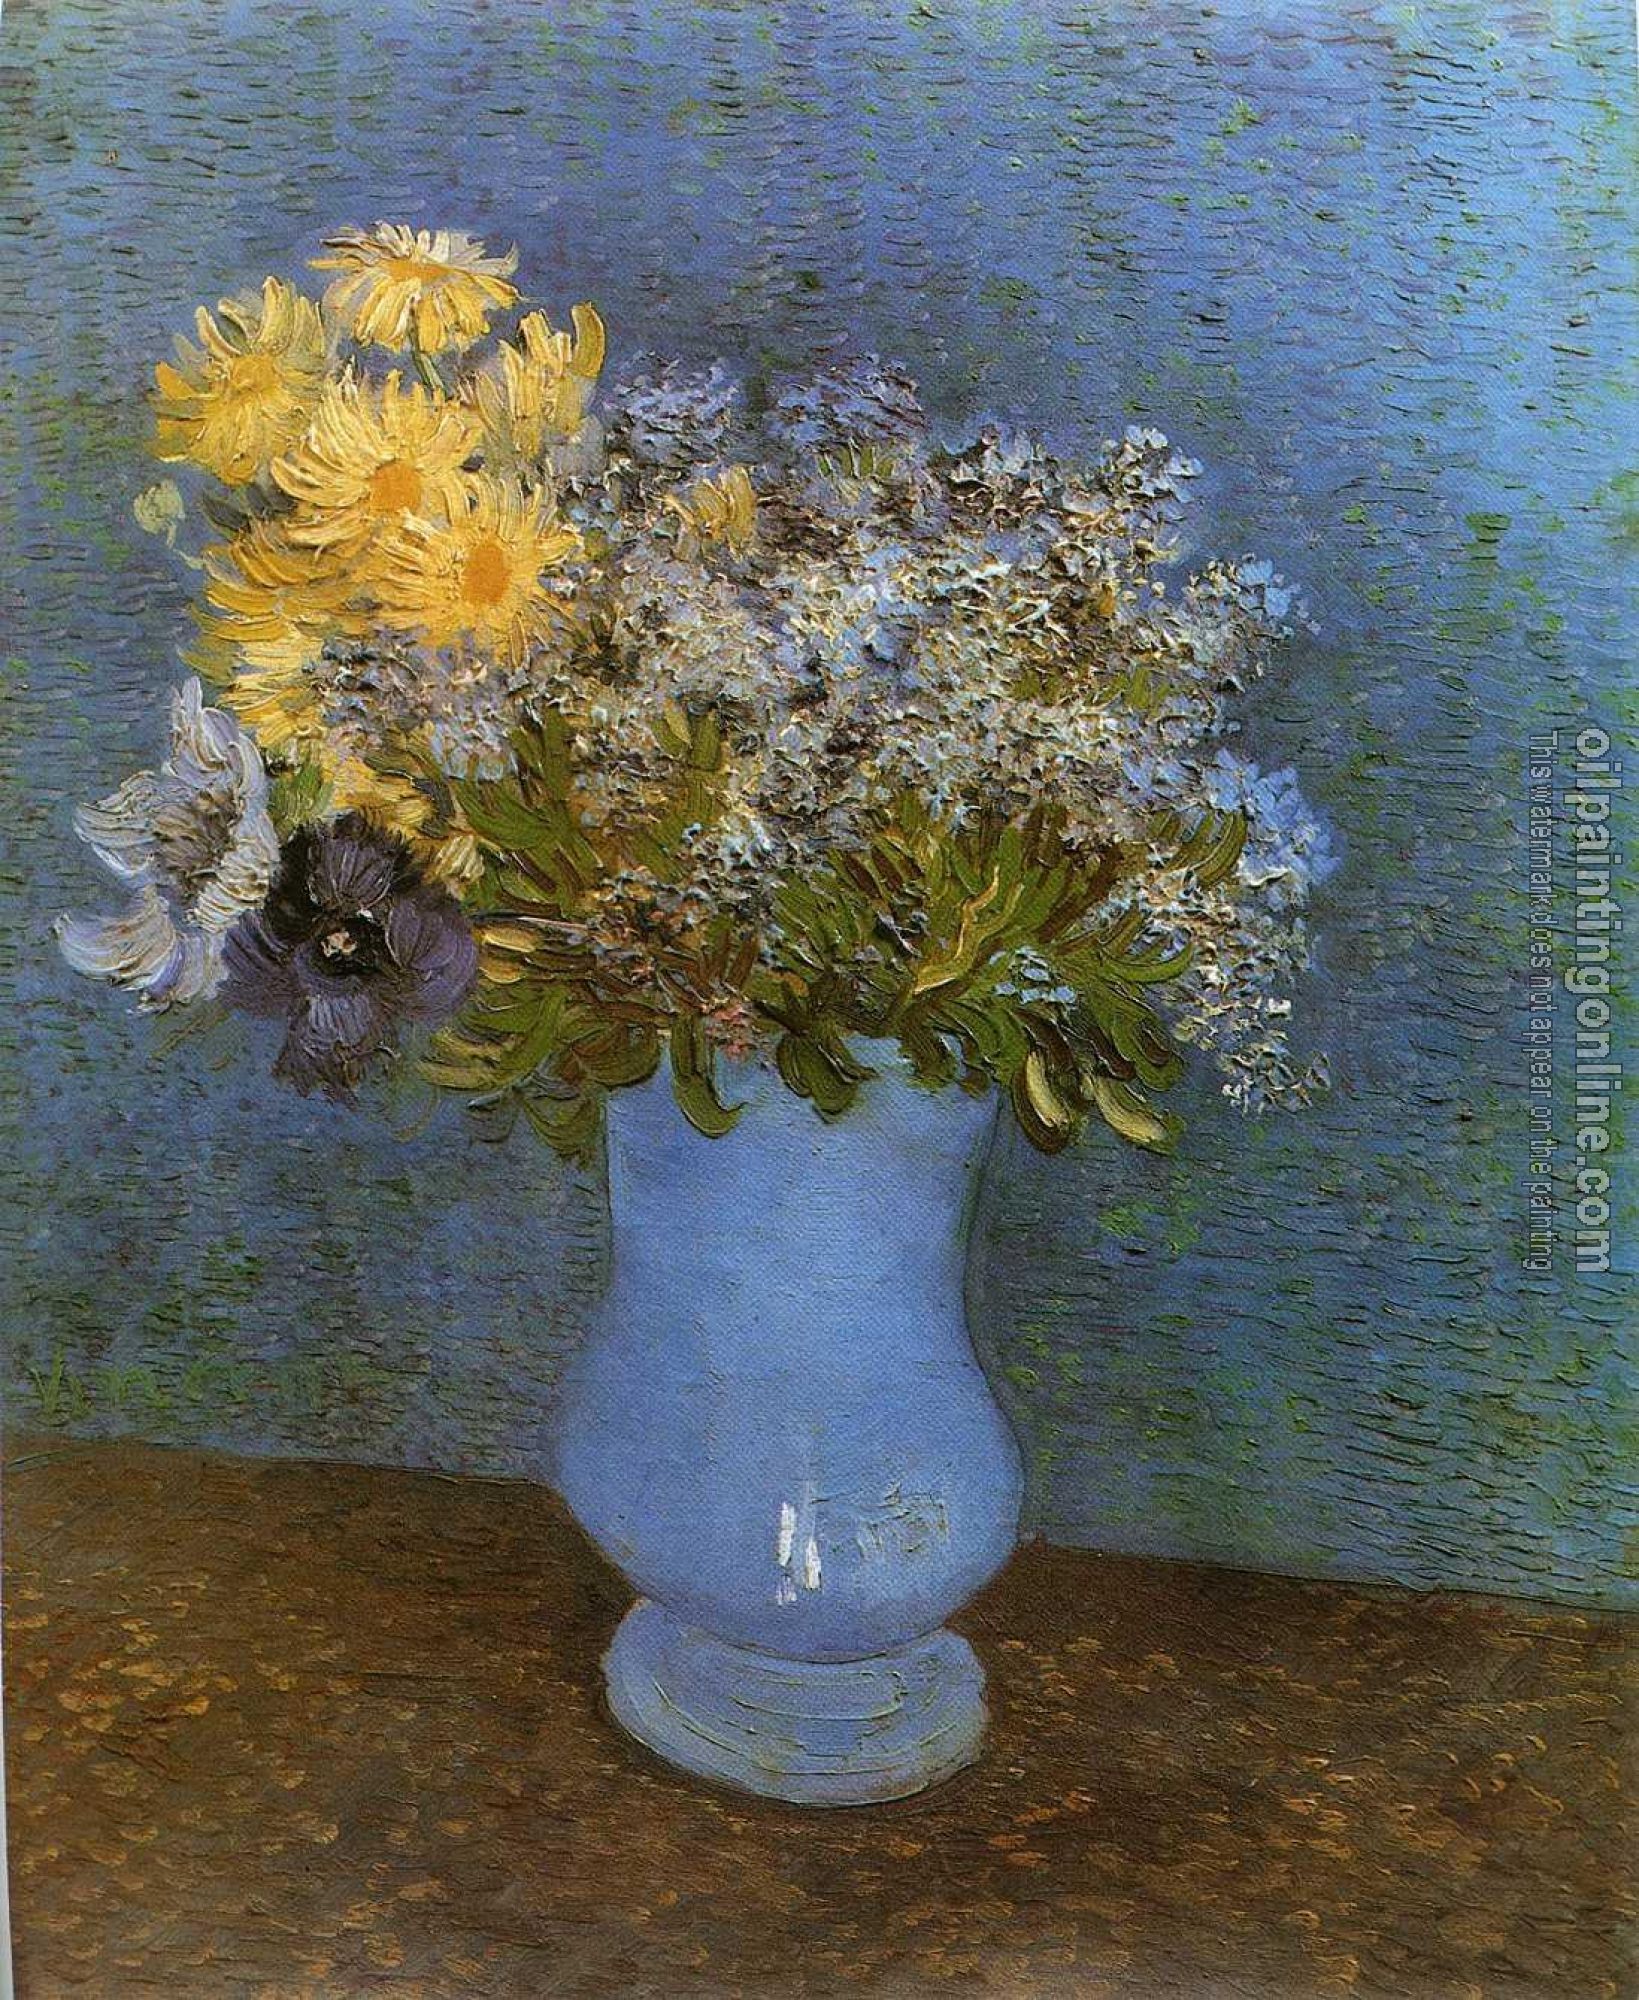 Gogh, Vincent van - Vase with Lilacs, Daisies and Anemomes